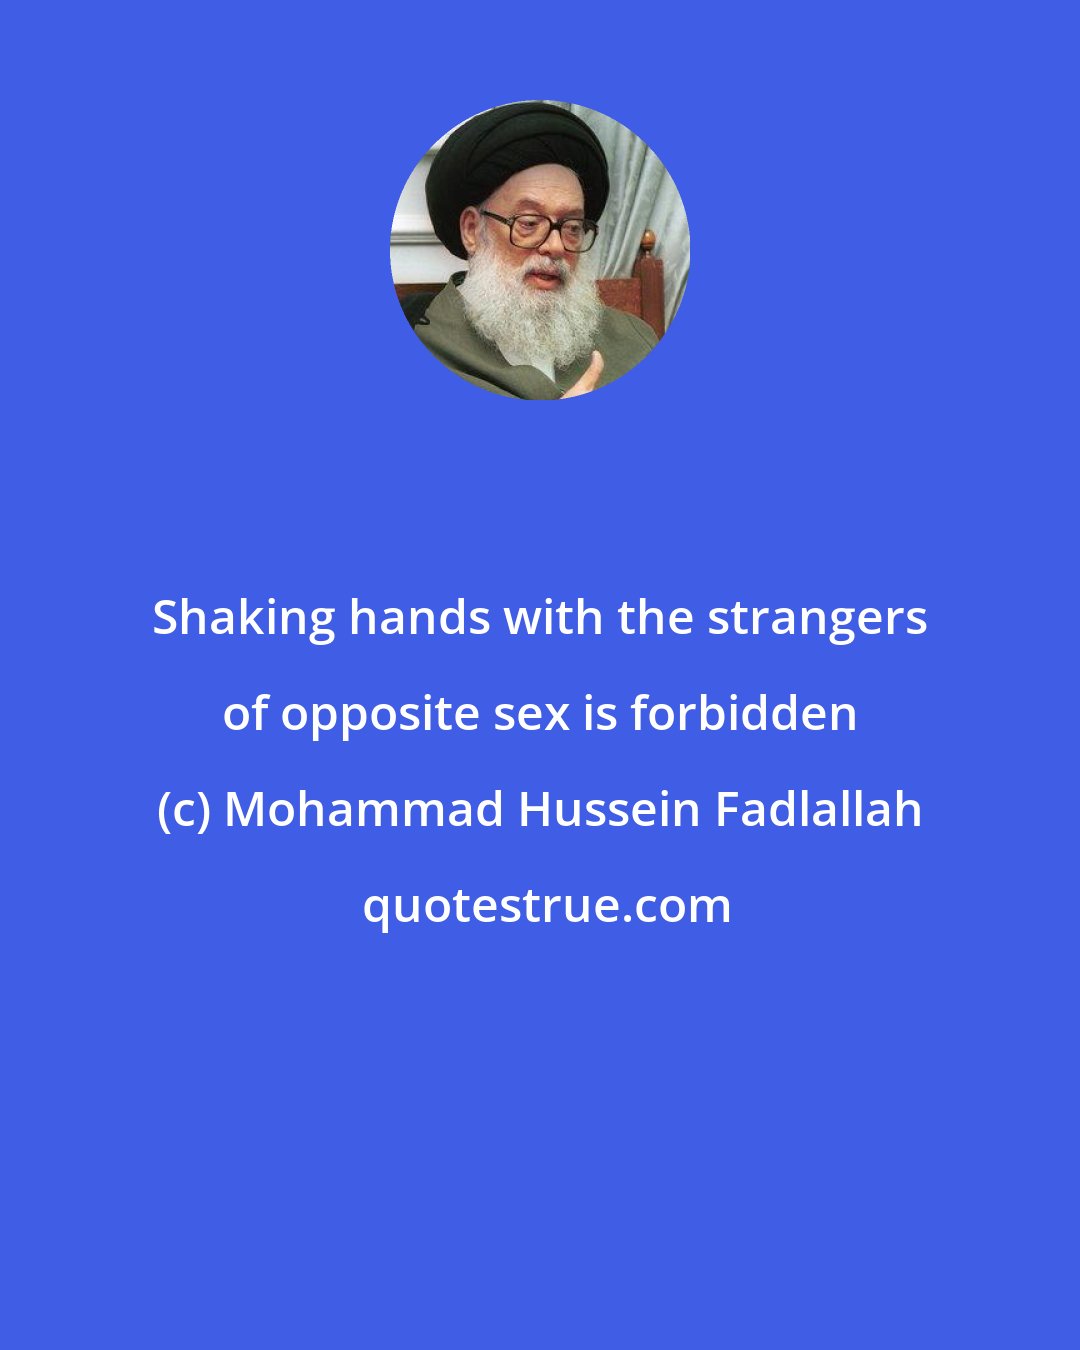 Mohammad Hussein Fadlallah: Shaking hands with the strangers of opposite sex is forbidden